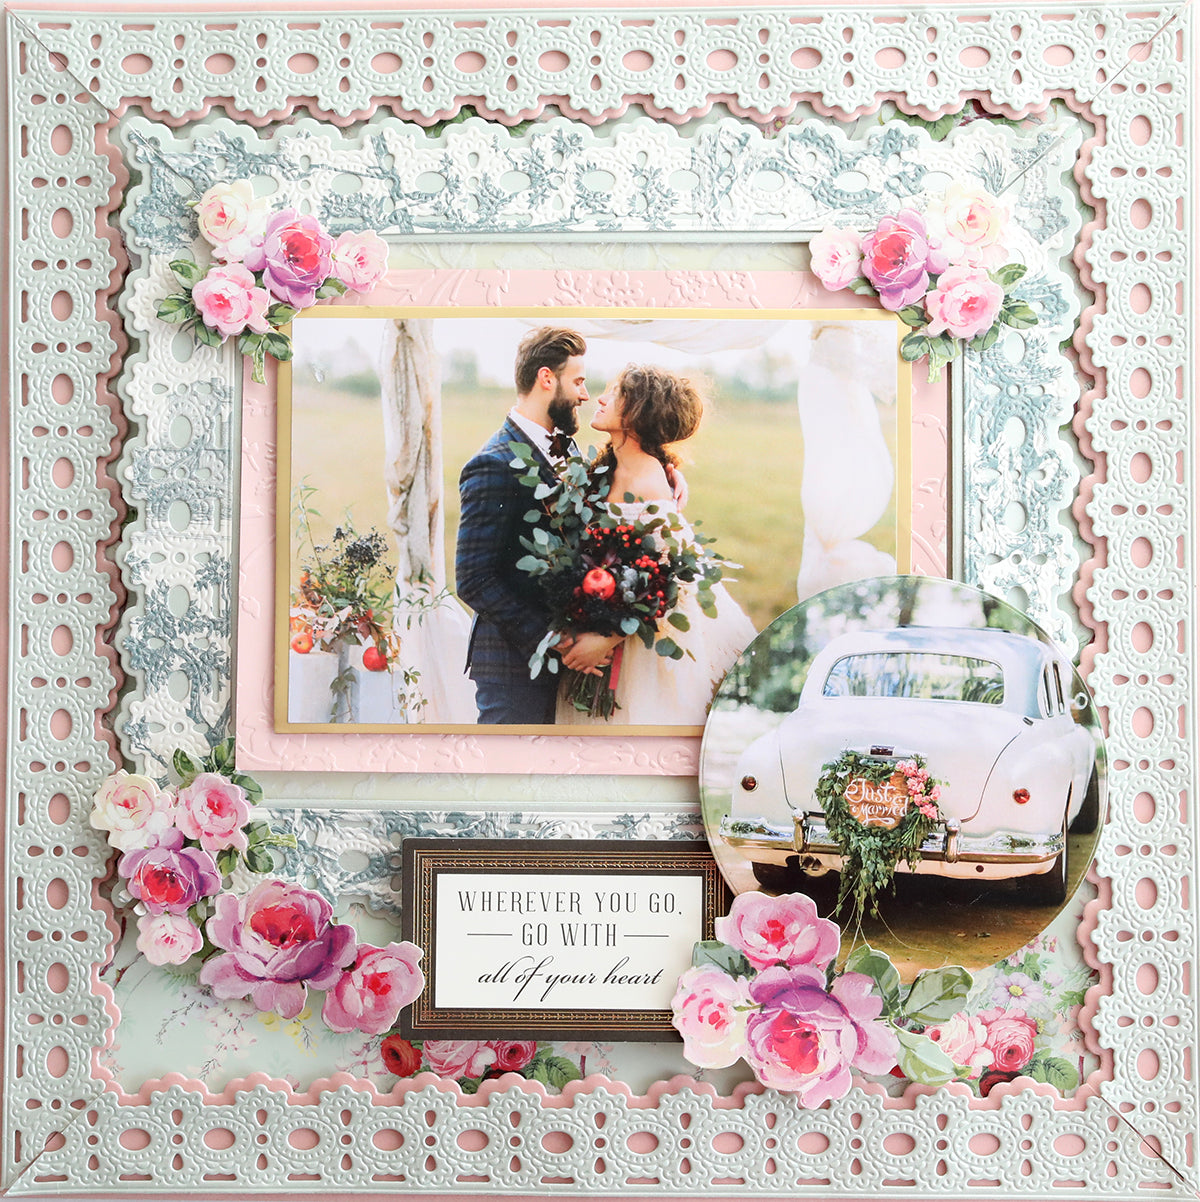 A decorative wedding photo frame featuring a couple embracing, surrounded by floral designs and an image of a car with "Just Married" sign. Embellished with scrapbook pages and 3D Ribbon Border 12" Dies, the text reads, "Wherever you go, go with all of your heart.